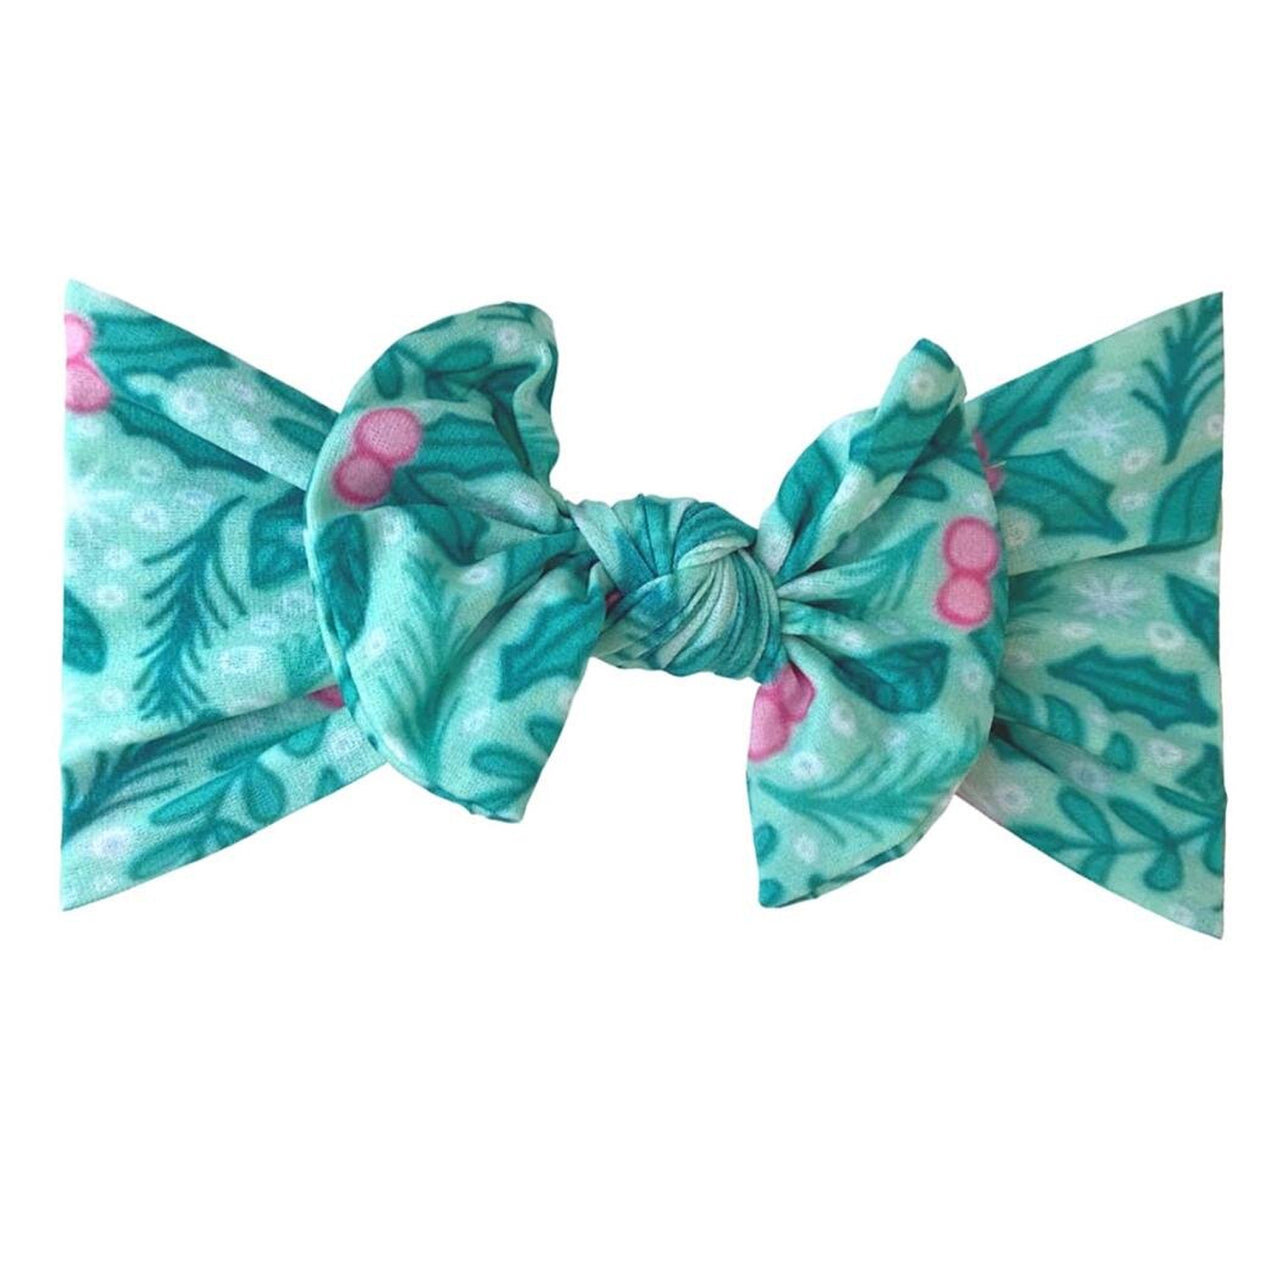 SpearmintLOVE’s baby Classic Knot Bow, Holly